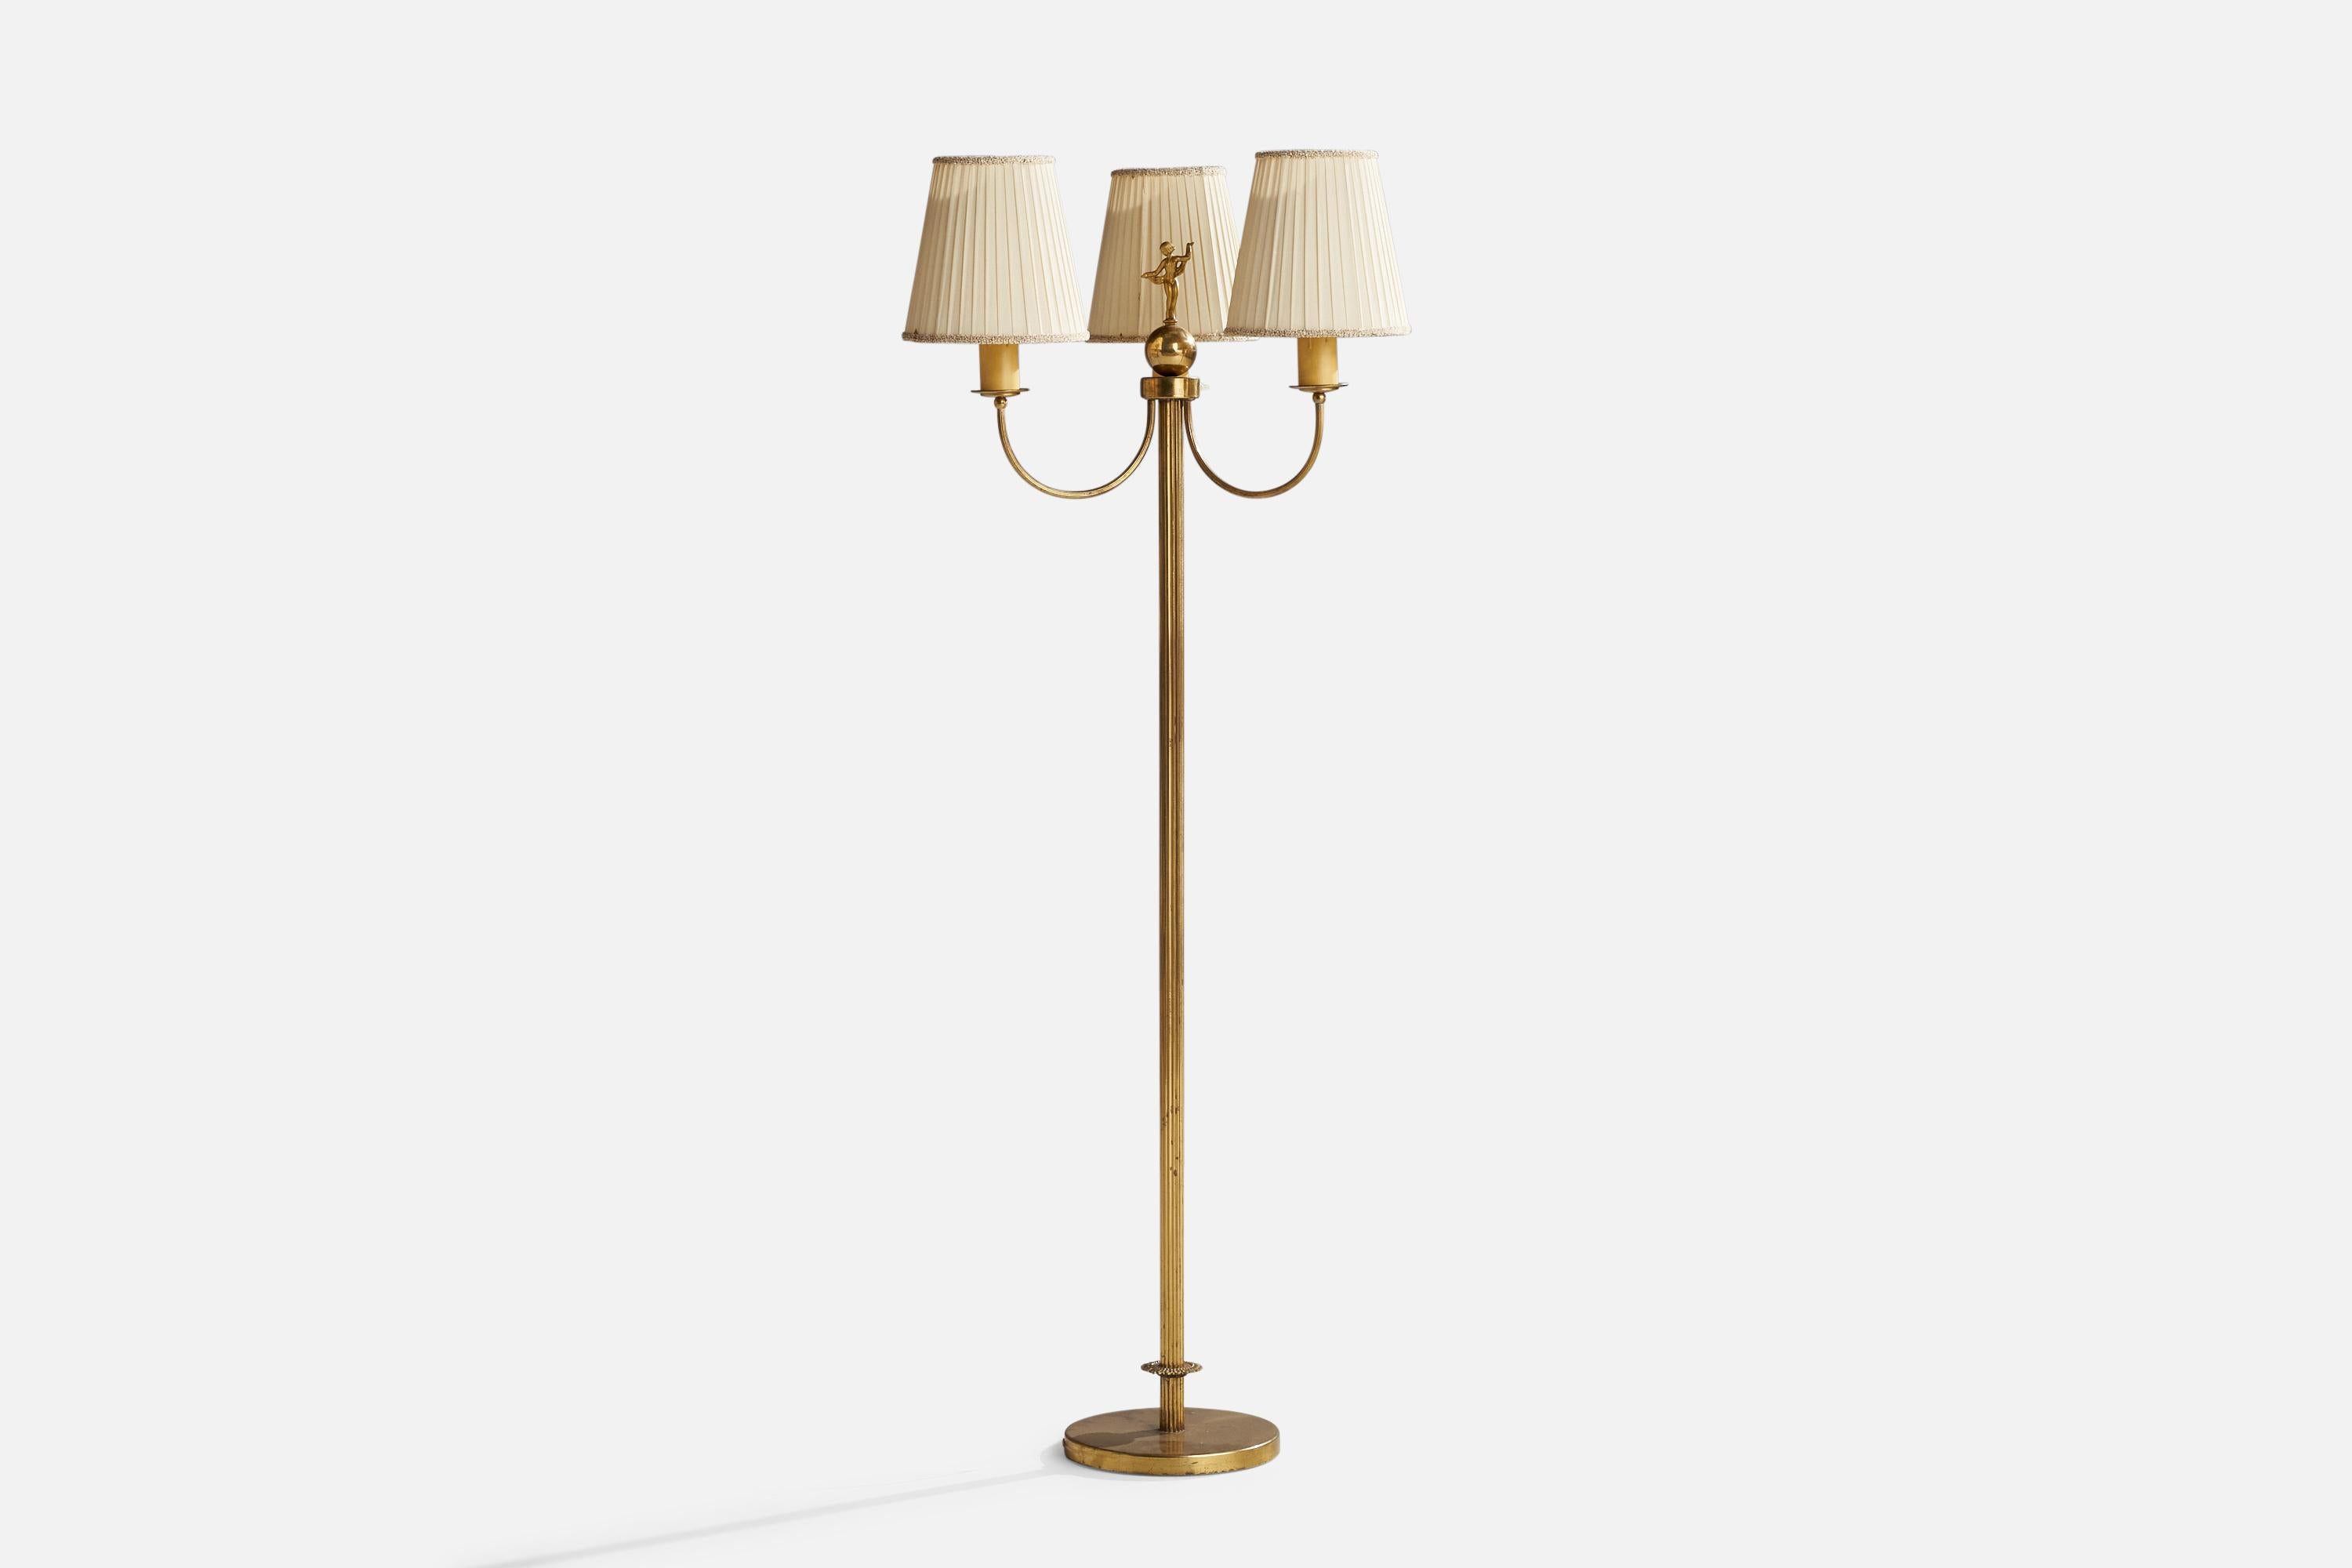 A brass, off-white fabric and bakelite floor lamp designed and produced in Sweden, 1940s.

Overall Dimensions (inches): 65”  H x 24” W x 23” D
Stated dimensions include shade.
Bulb Specifications: E-26 Bulb
Number of Sockets: 3
All lighting will be